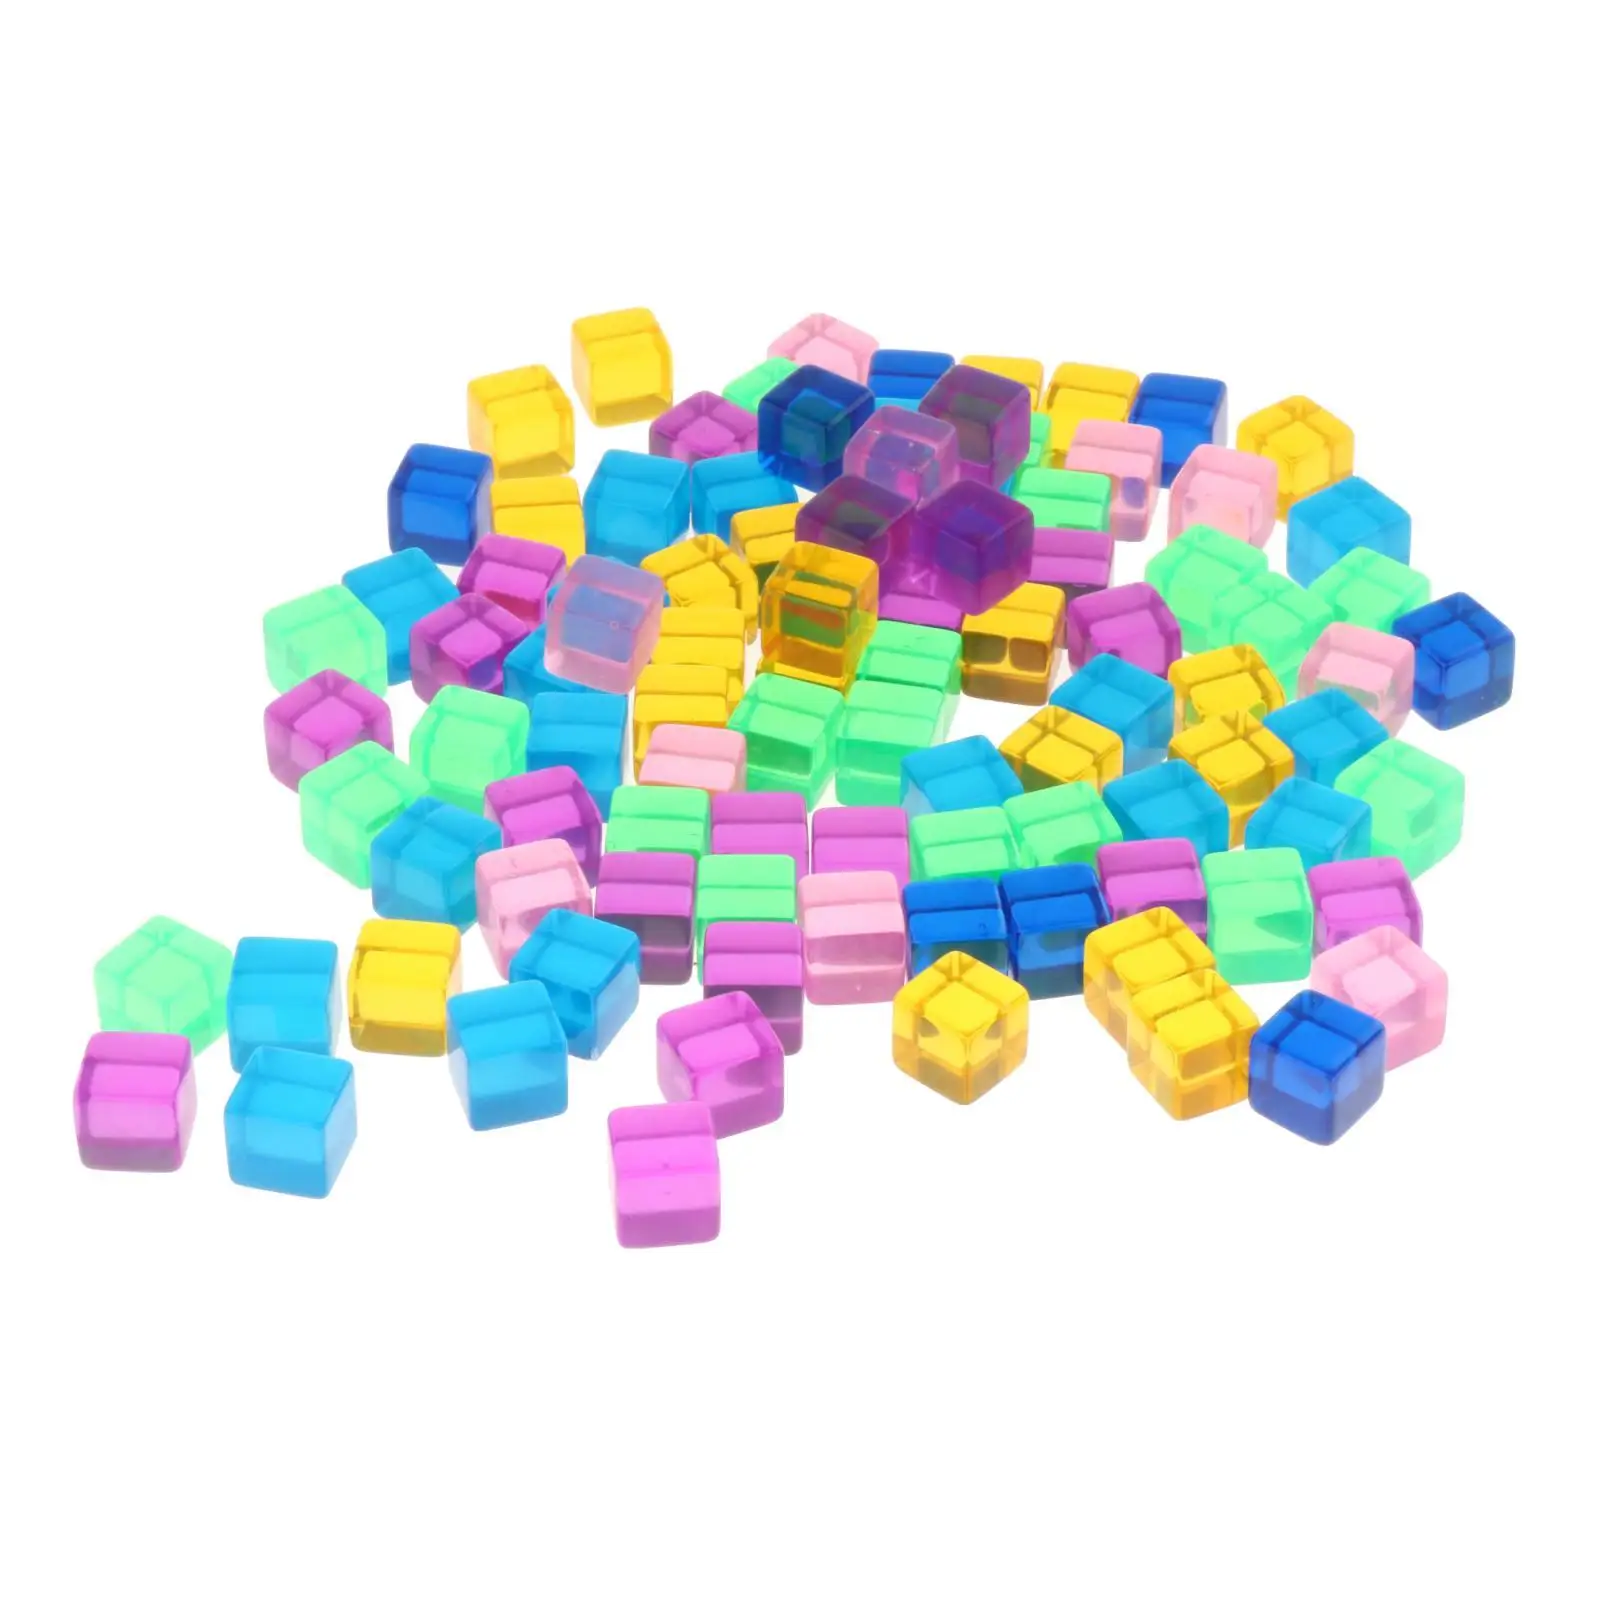 100 Pieces D6 16mm Transparent Blank Dices Translucent Colors Colorful Dice Square Dice for Party Favors Puzzle Game Dice Games